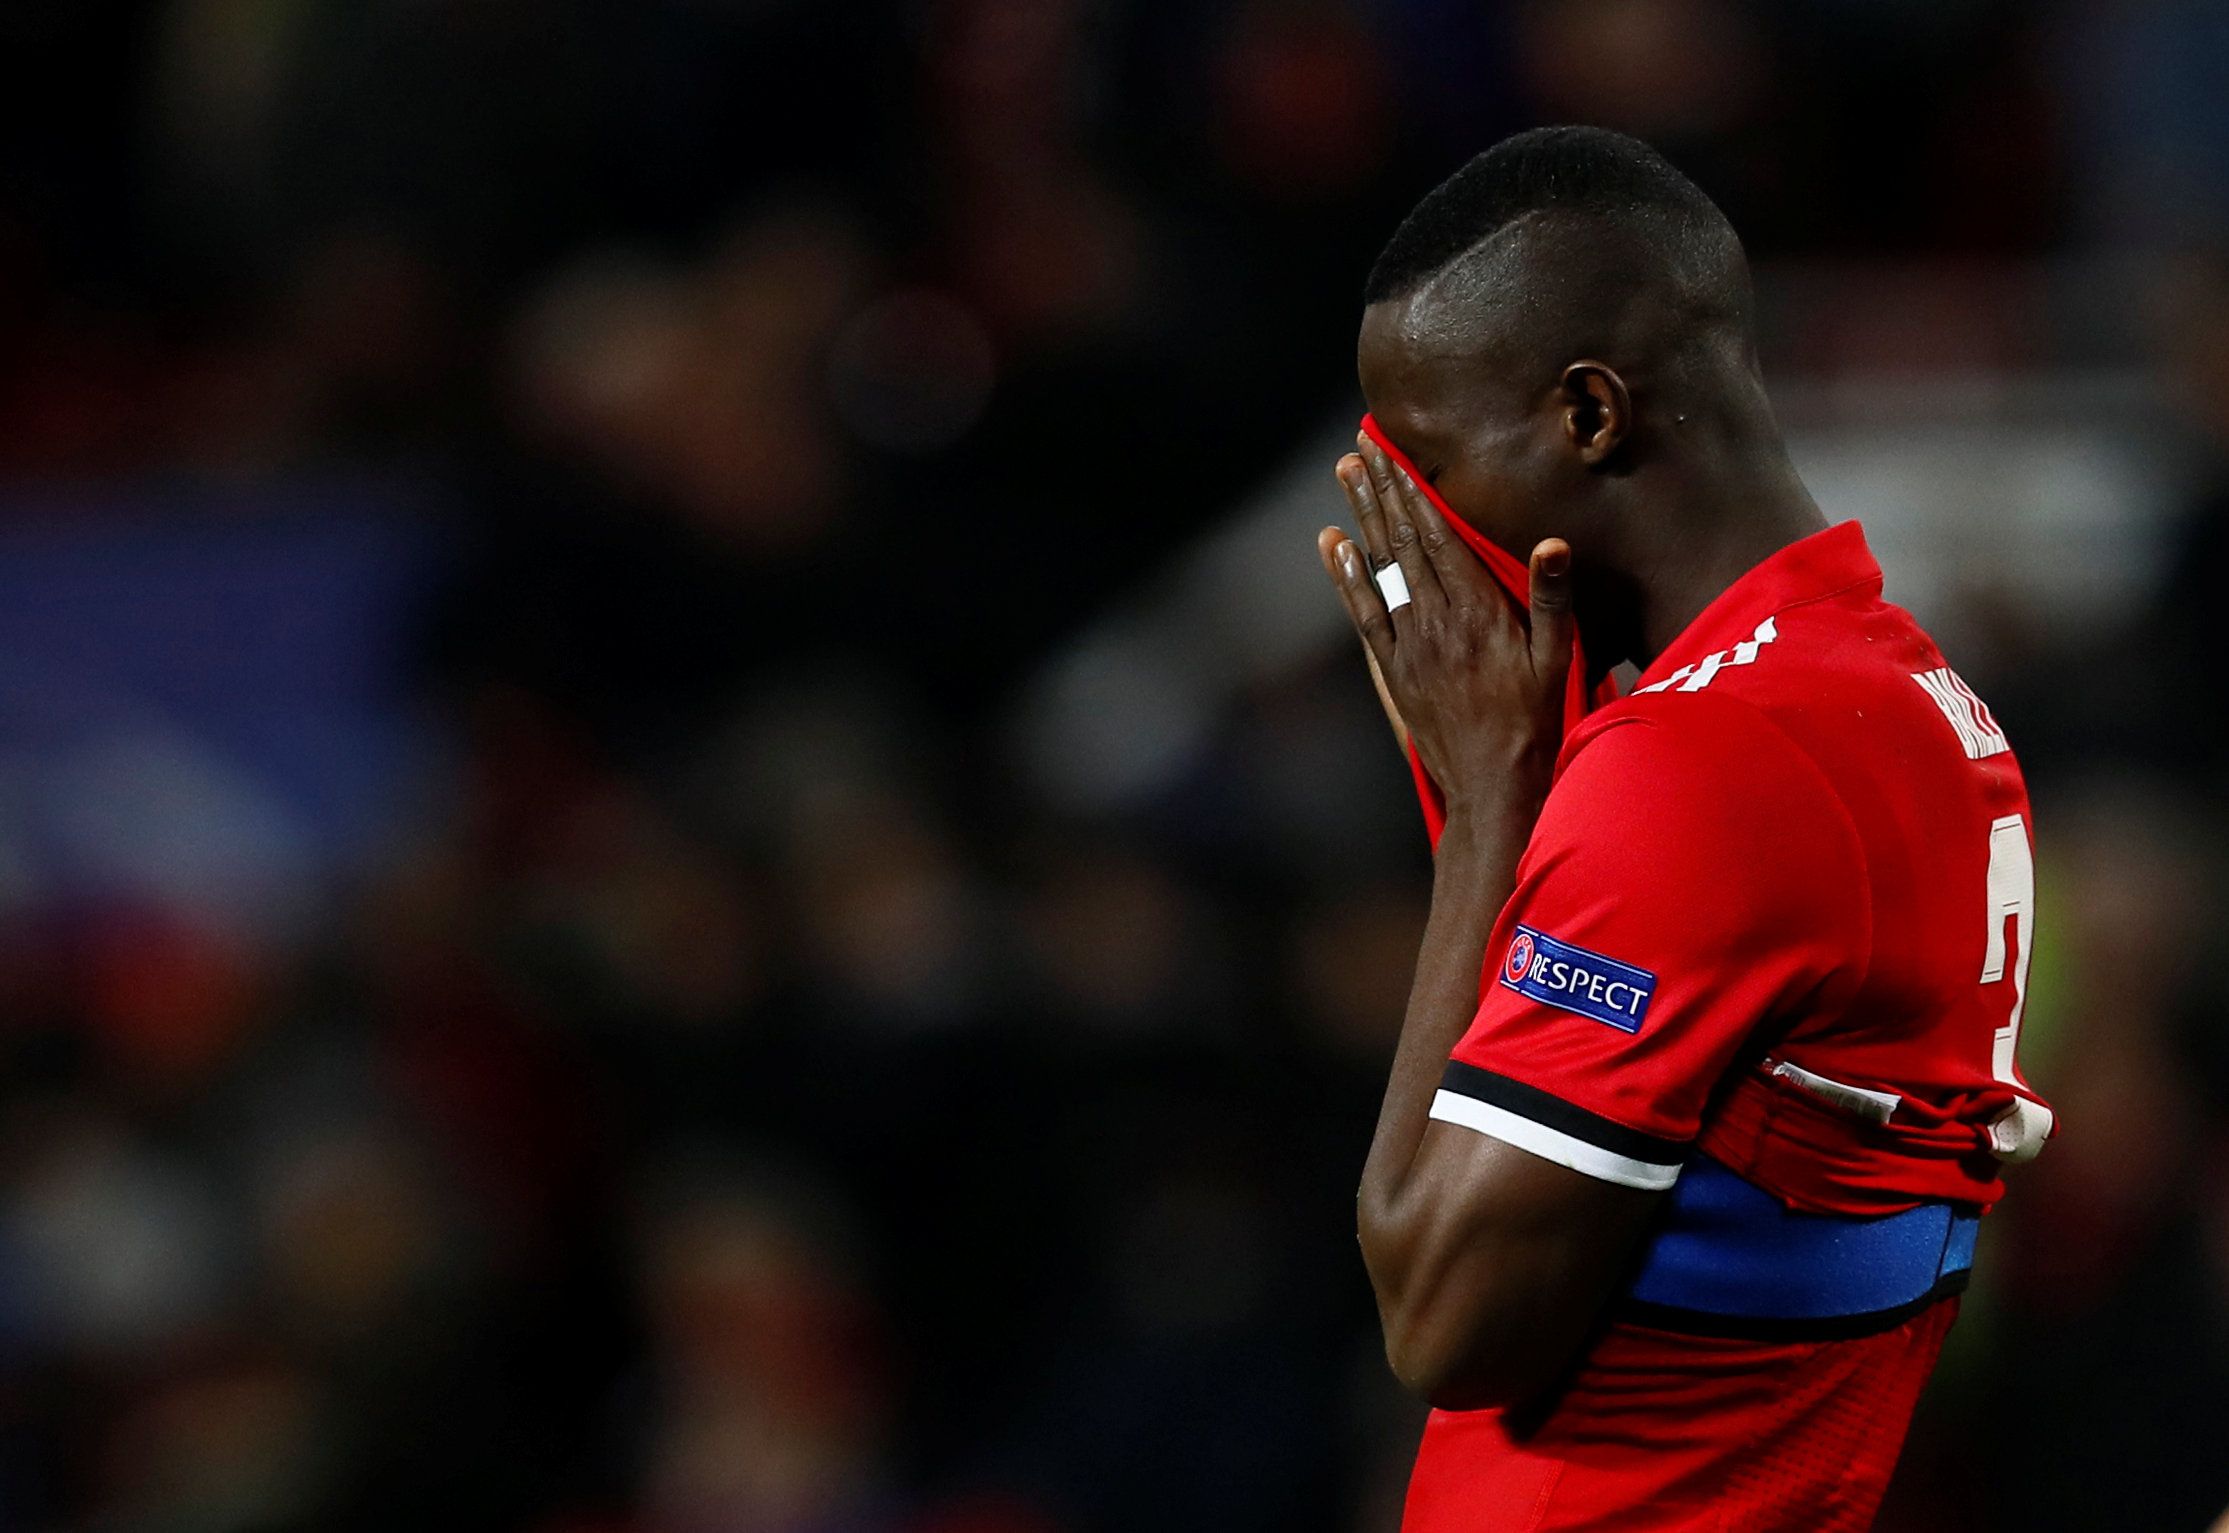 Soccer Football - Champions League Round of 16 Second Leg - Manchester United vs Sevilla - Old Trafford, Manchester, Britain - March 13, 2018   Manchester United's Eric Bailly looks dejected after the match     Action Images via Reuters/Jason Cairnduff